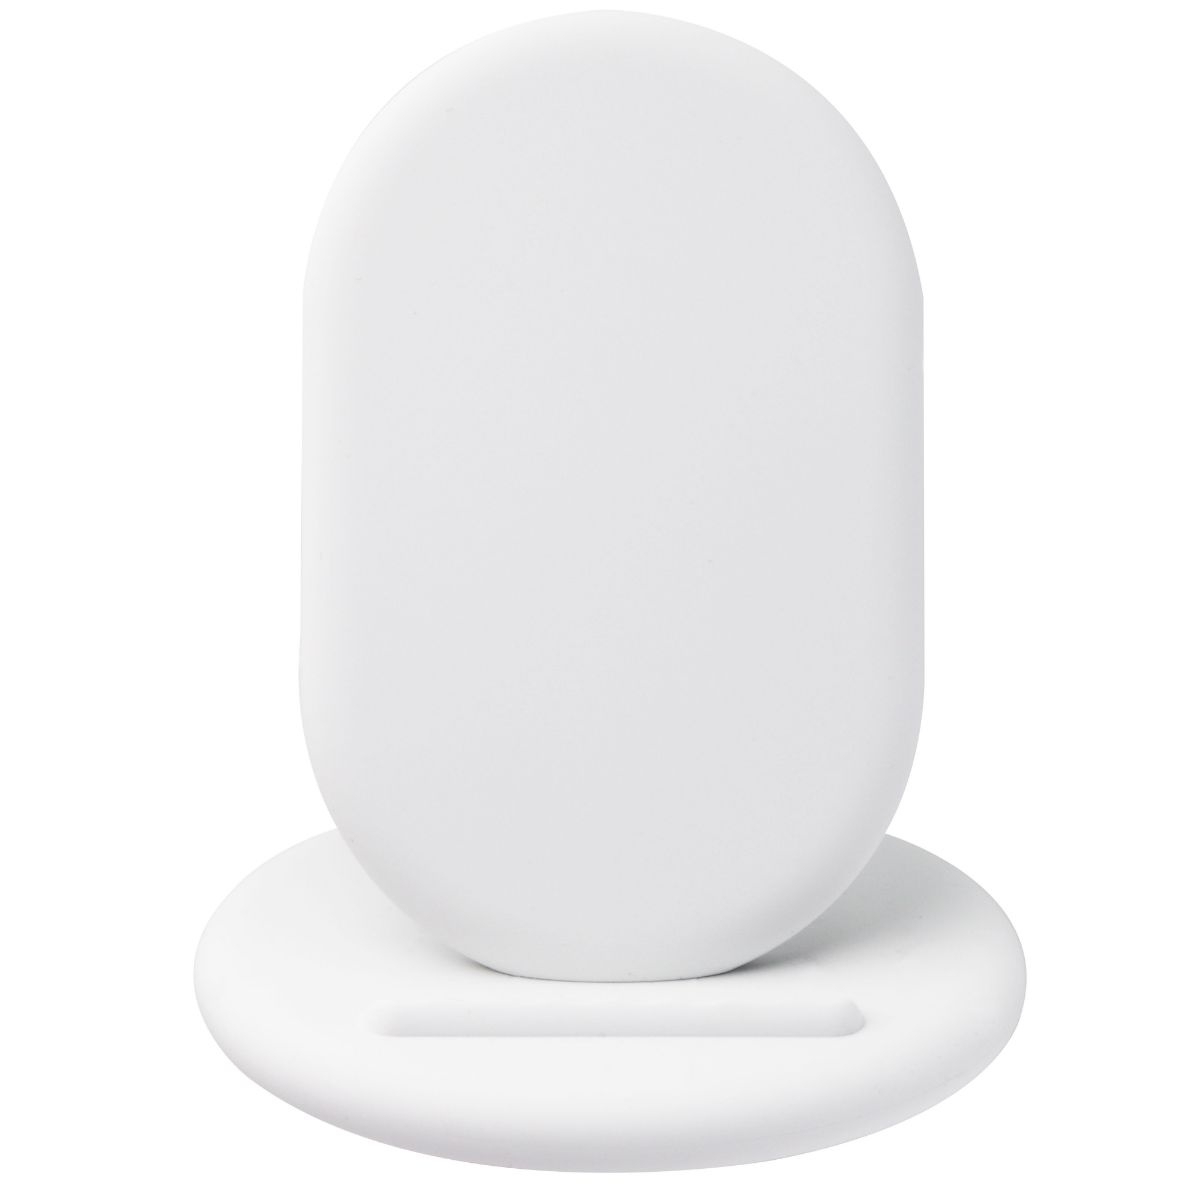 Google Wireless Charging Stand For Pixel 3 Or Pixel 3XL - White - GA00507-US (Refurbished)